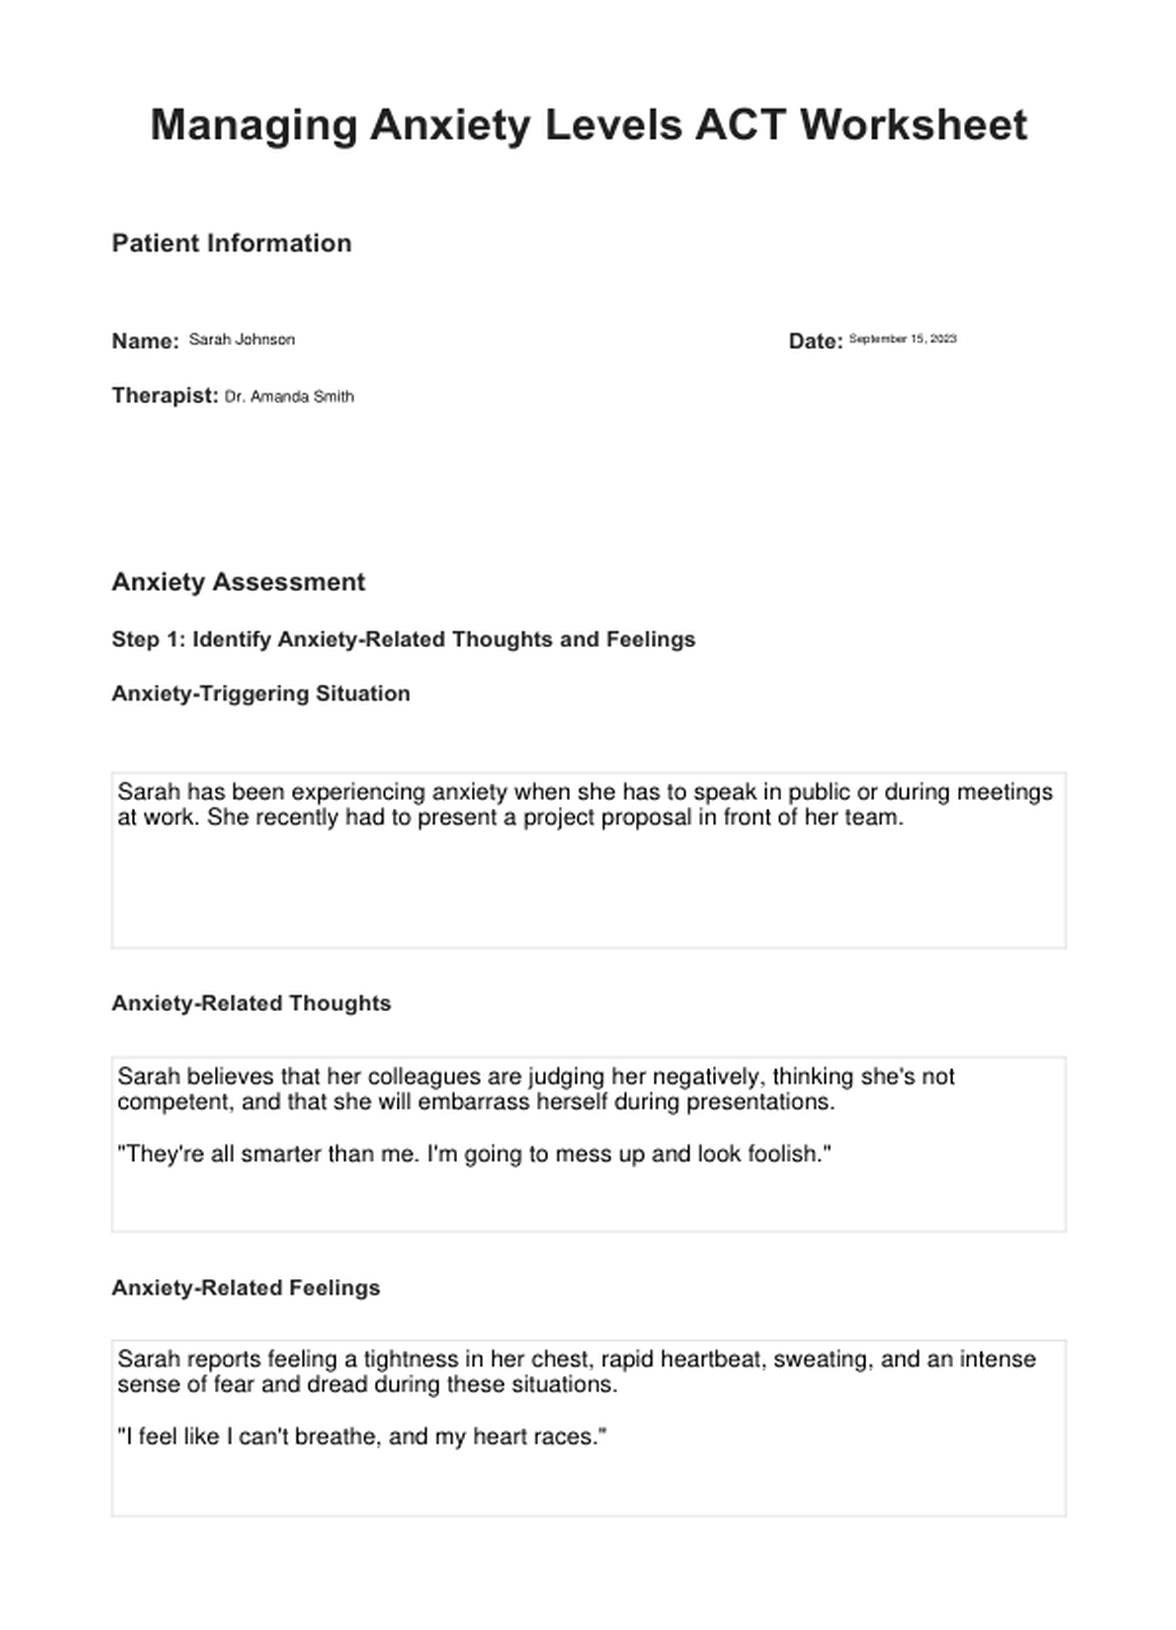 Measuring Anxiety Levels ACT Worksheet PDF Example